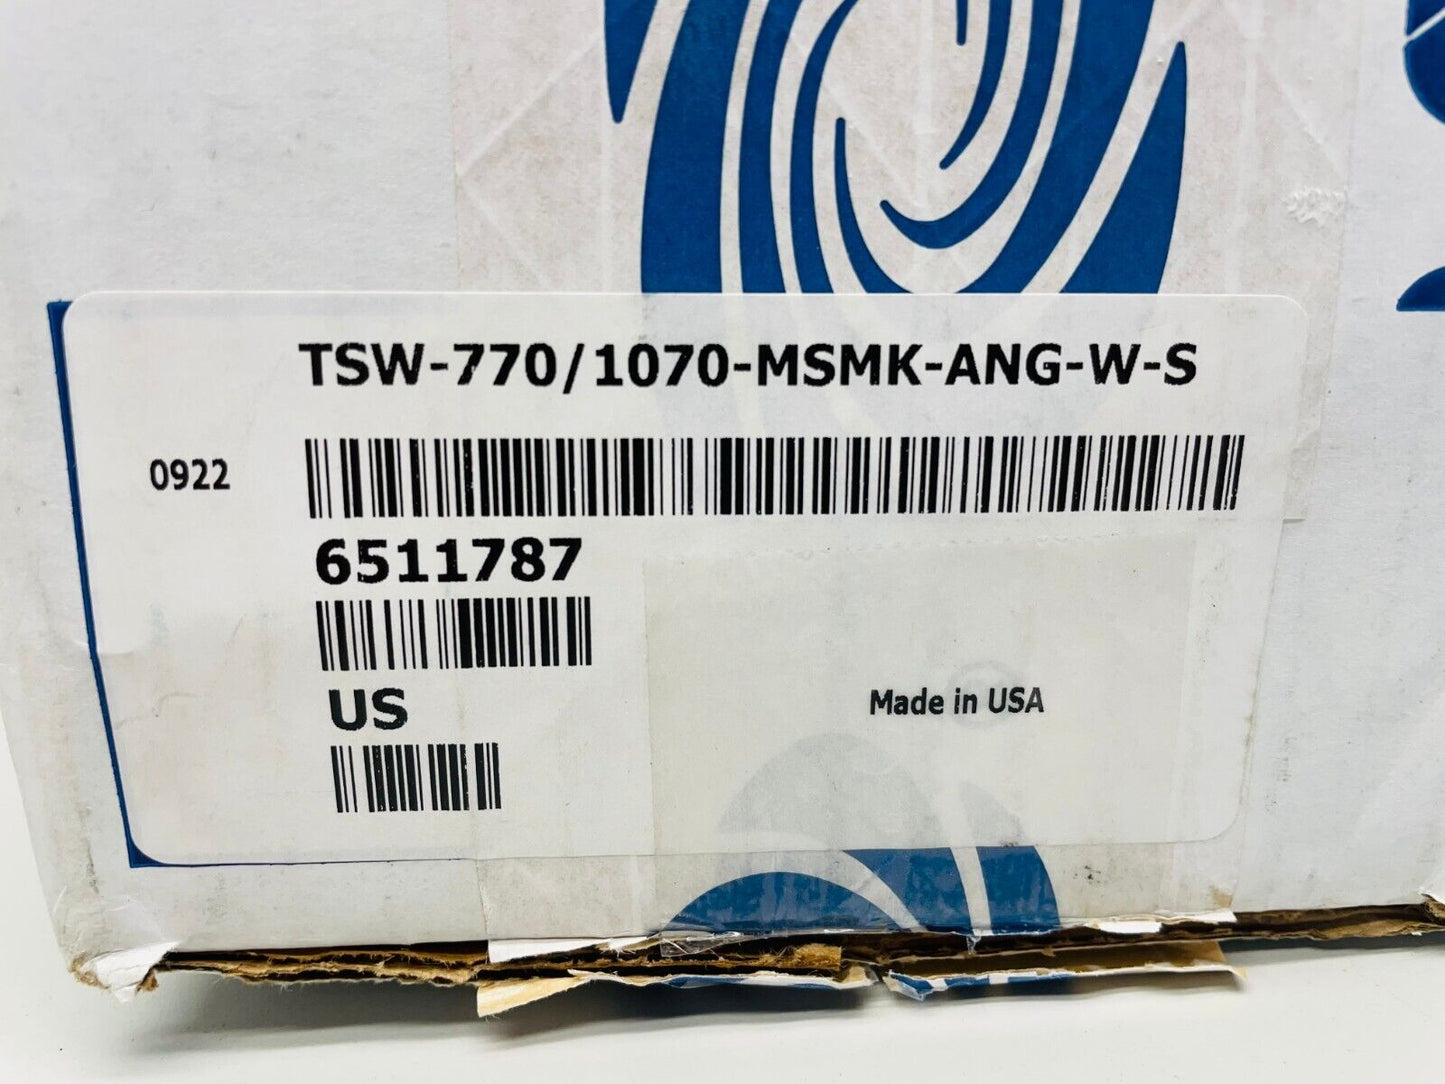 Crestron 6511787 TSW-770/1070-MSMK-ANG-W-S Multisurface Mount Kit for TSW-770